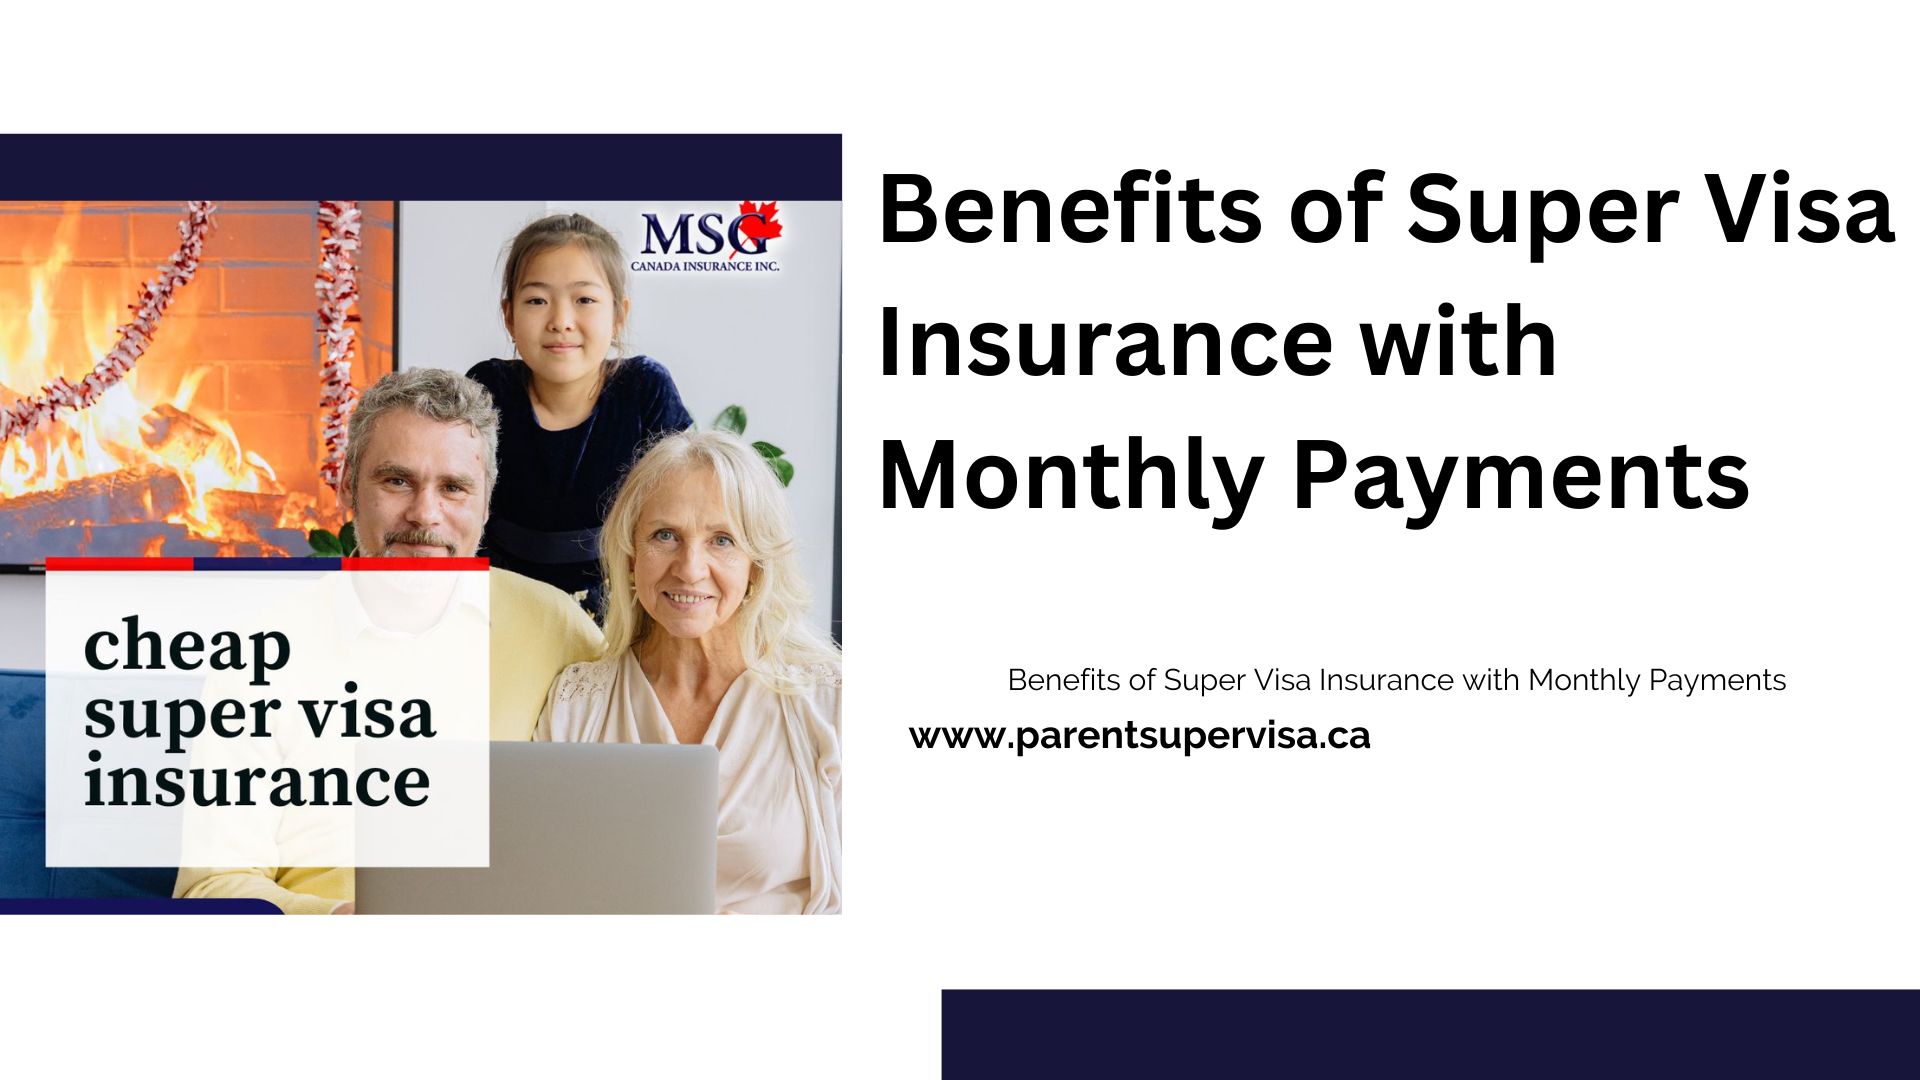 Benefits of Super Visa Insurance with Monthly Payments